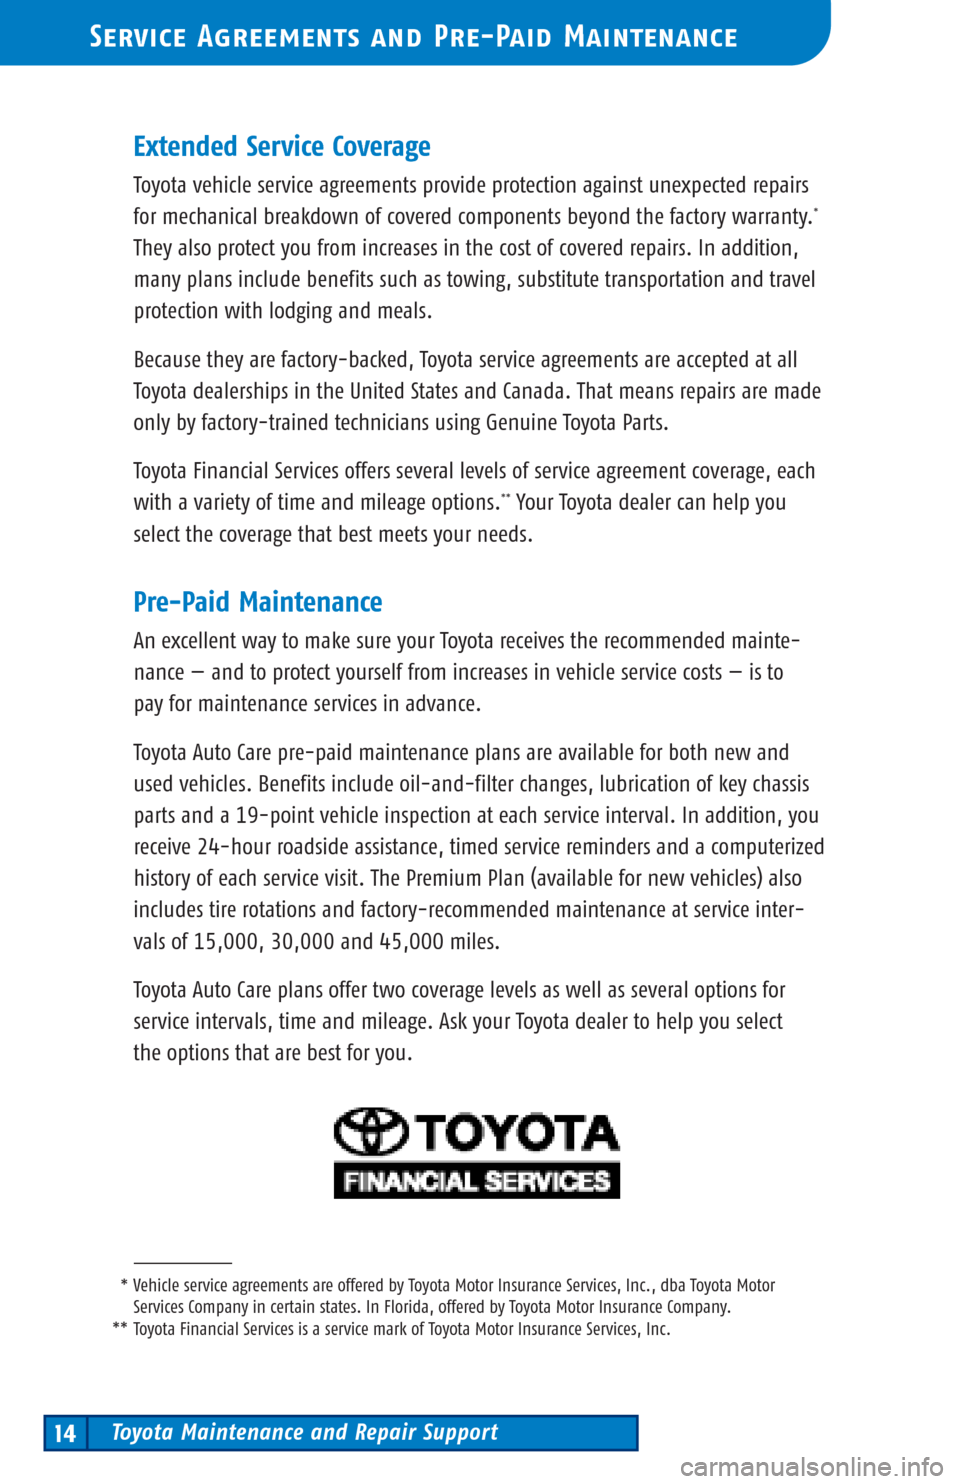 TOYOTA 4RUNNER 2002 N210 / 4.G Scheduled Maintenance Guide Toyota Maintenance and Repair Support14
Service Agreements and Pre-Paid Maintenance
Extended Service Coverage
Toyota vehicle service agreements provide protection against unexpected repairs
formechani